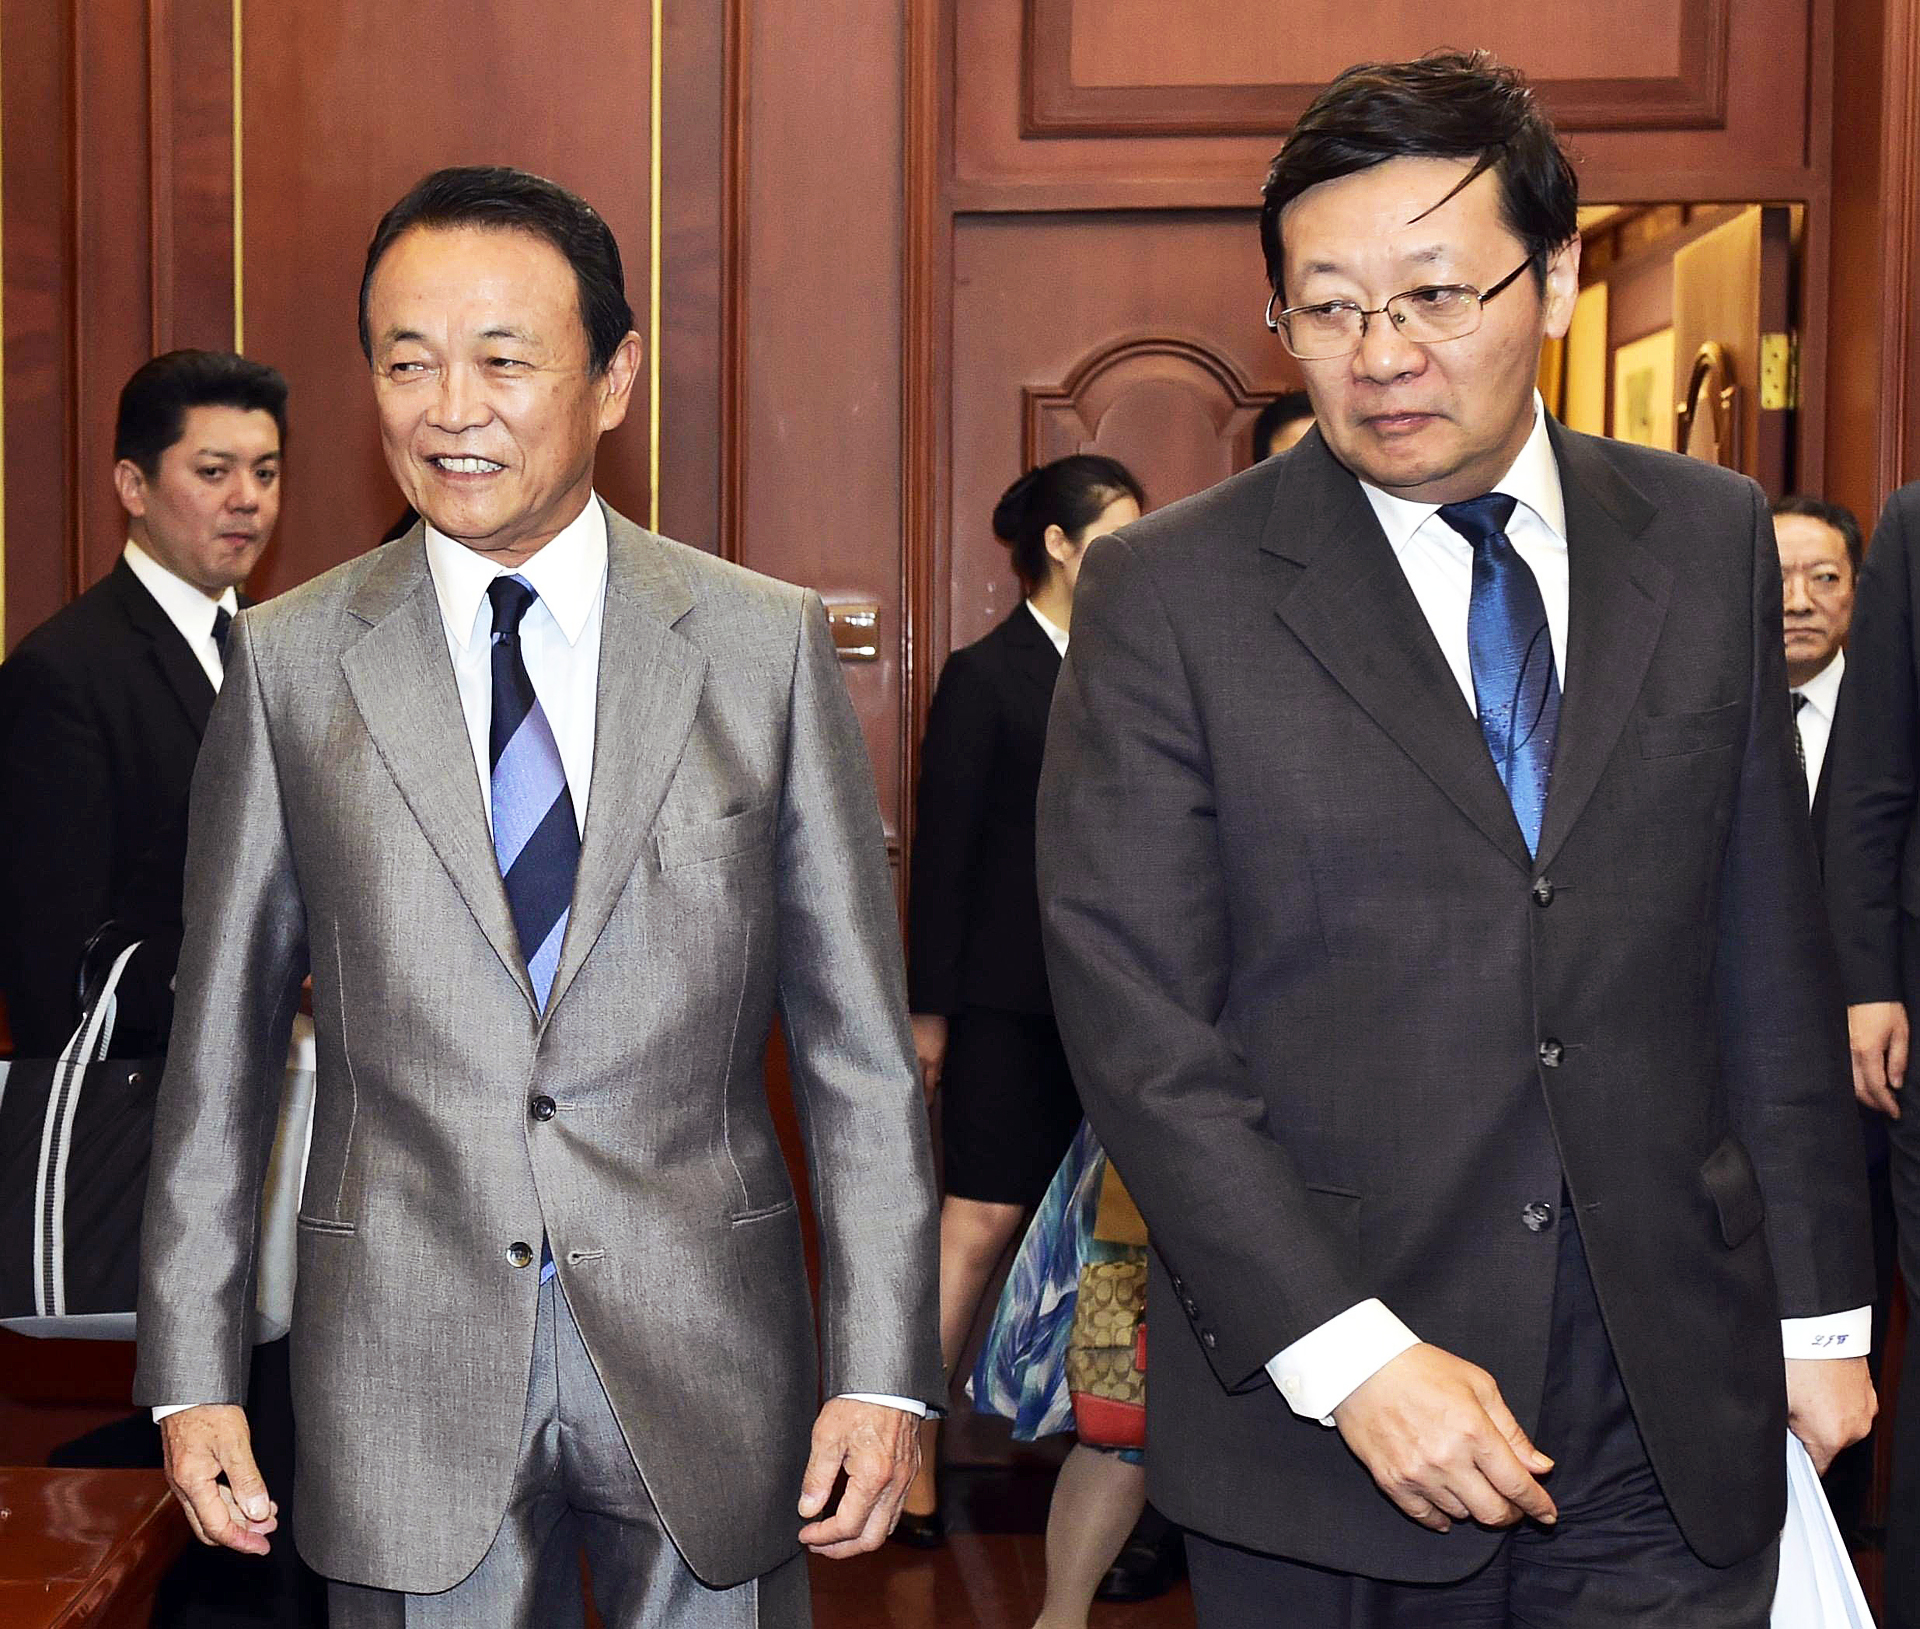 Chinese finance minister Lou Jiwei (right) and his Japanese counterpart Taro Aso head for their meeting at the Diaoyutai State Guesthouse in Beijing. Photo: Kyodo 